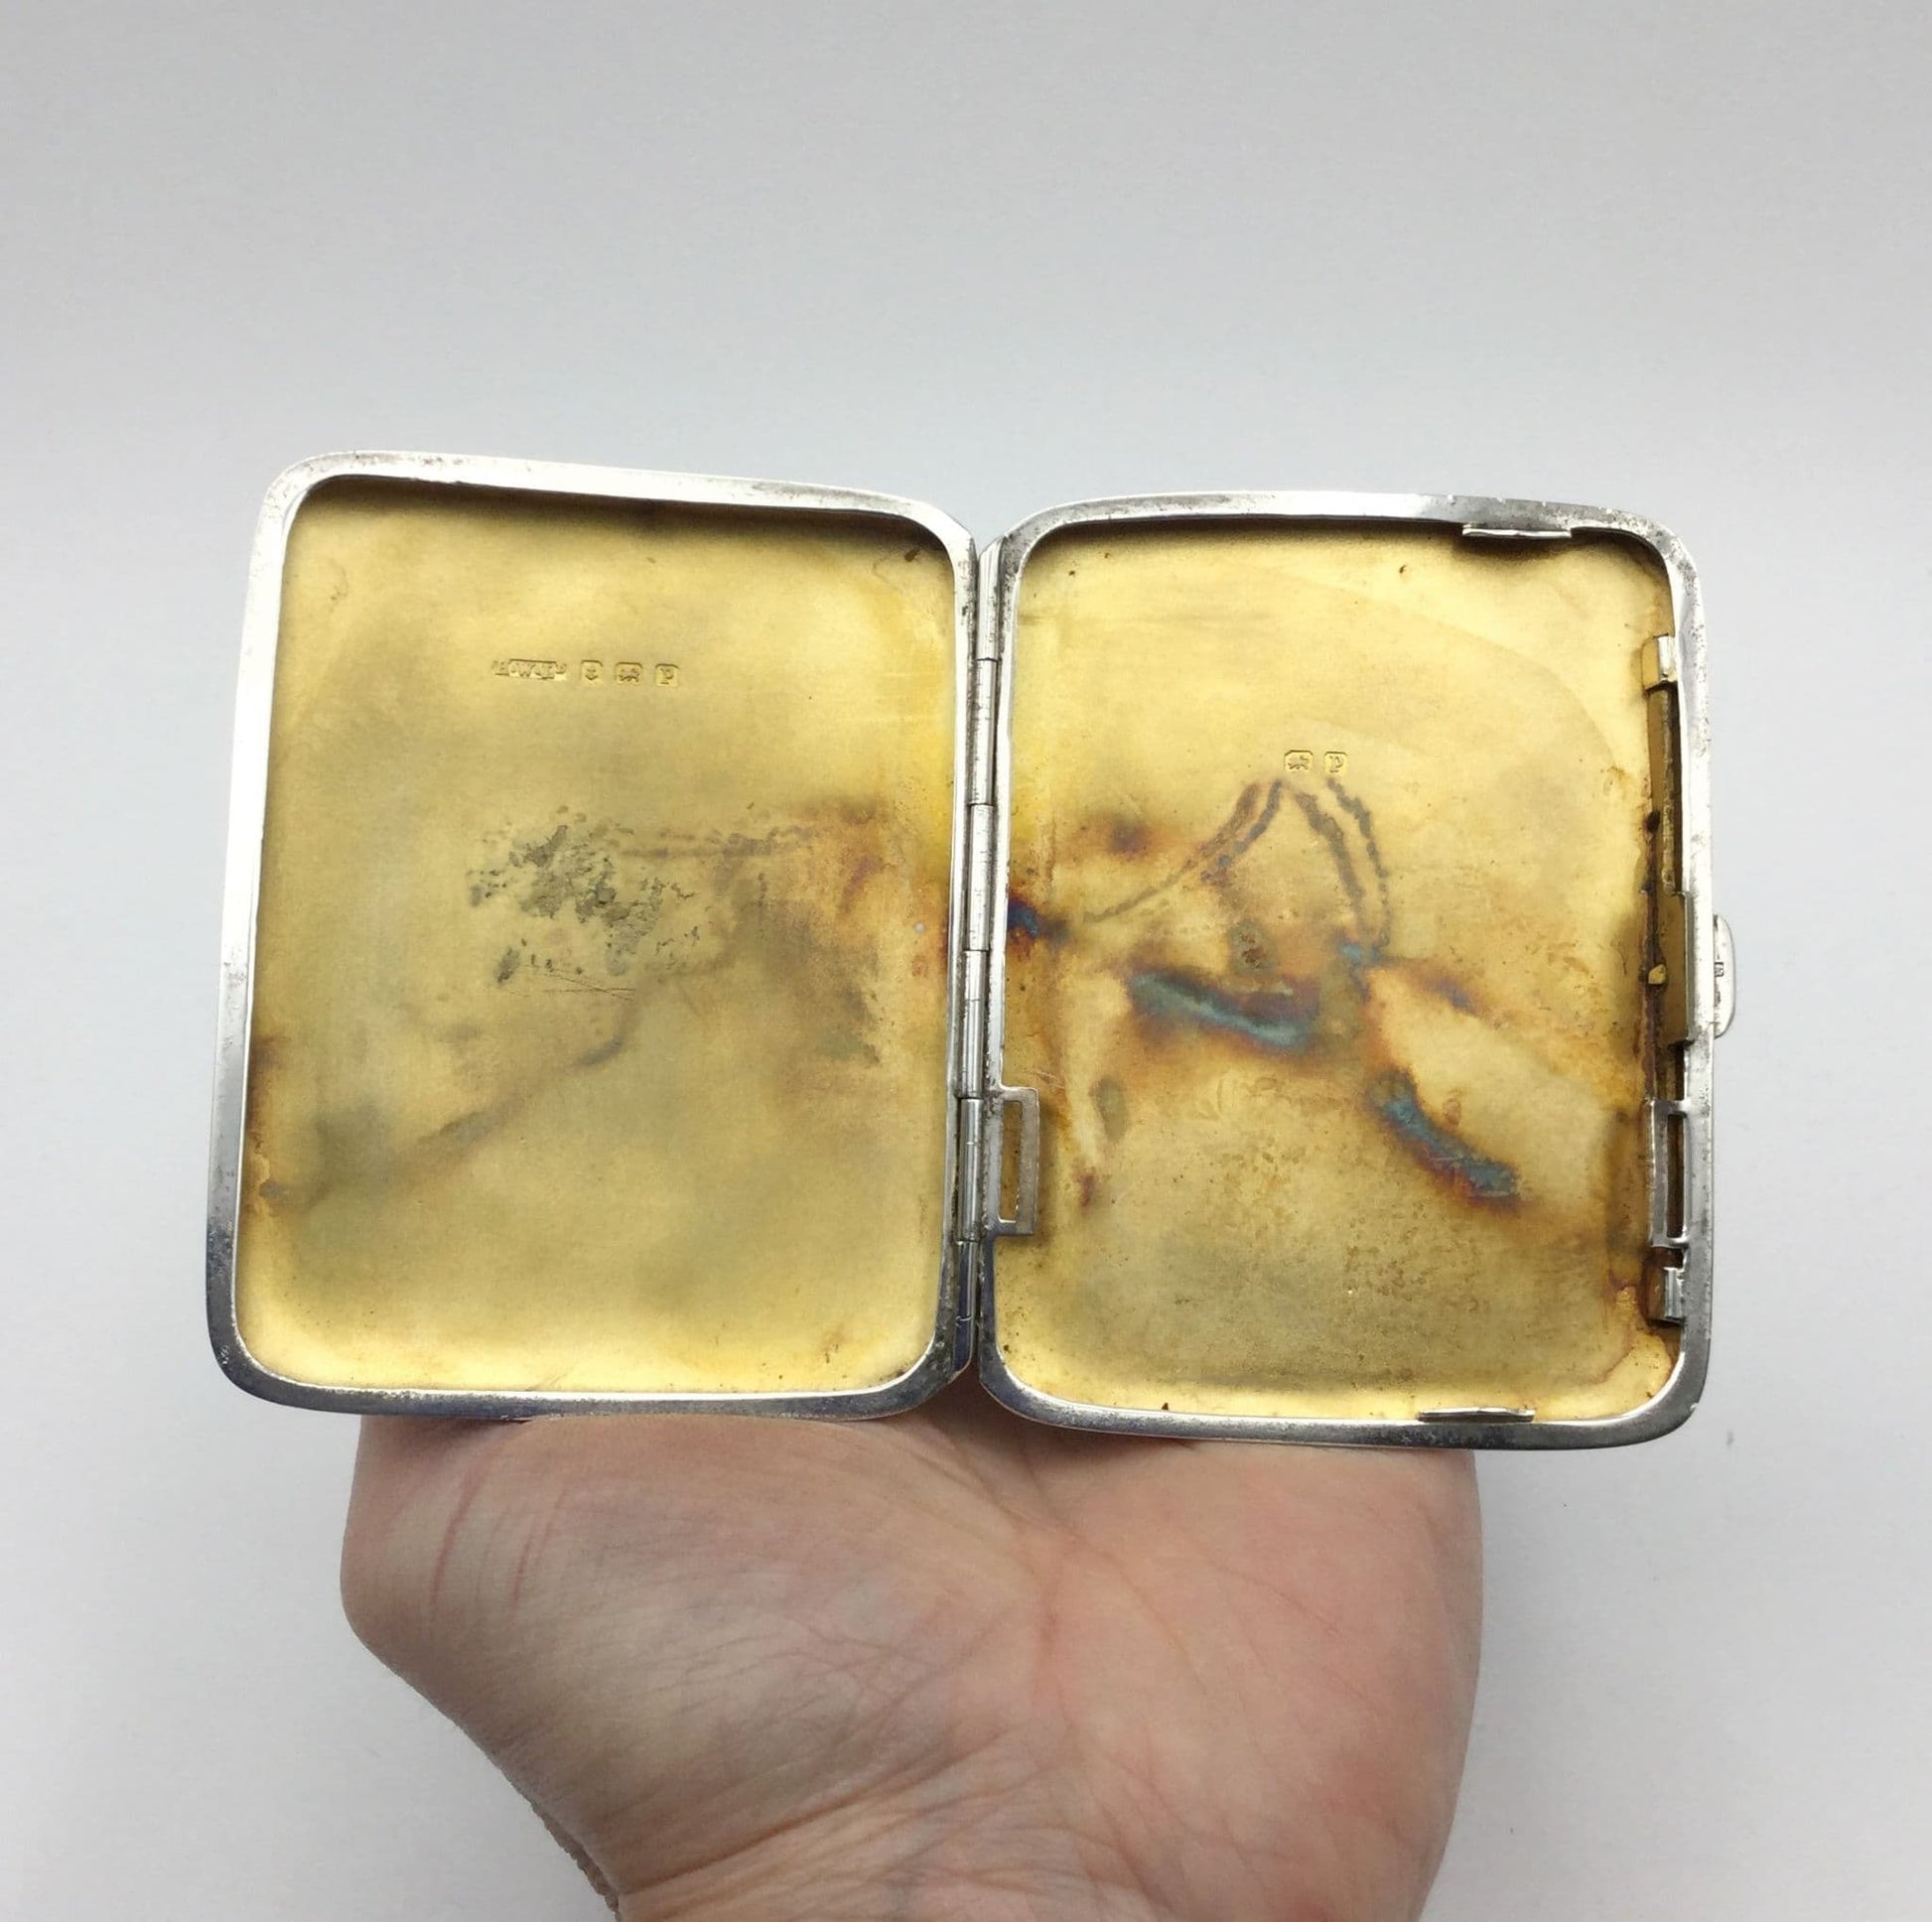 open antique silver cigarette case showing a lovely golden gilded interior held in a hand